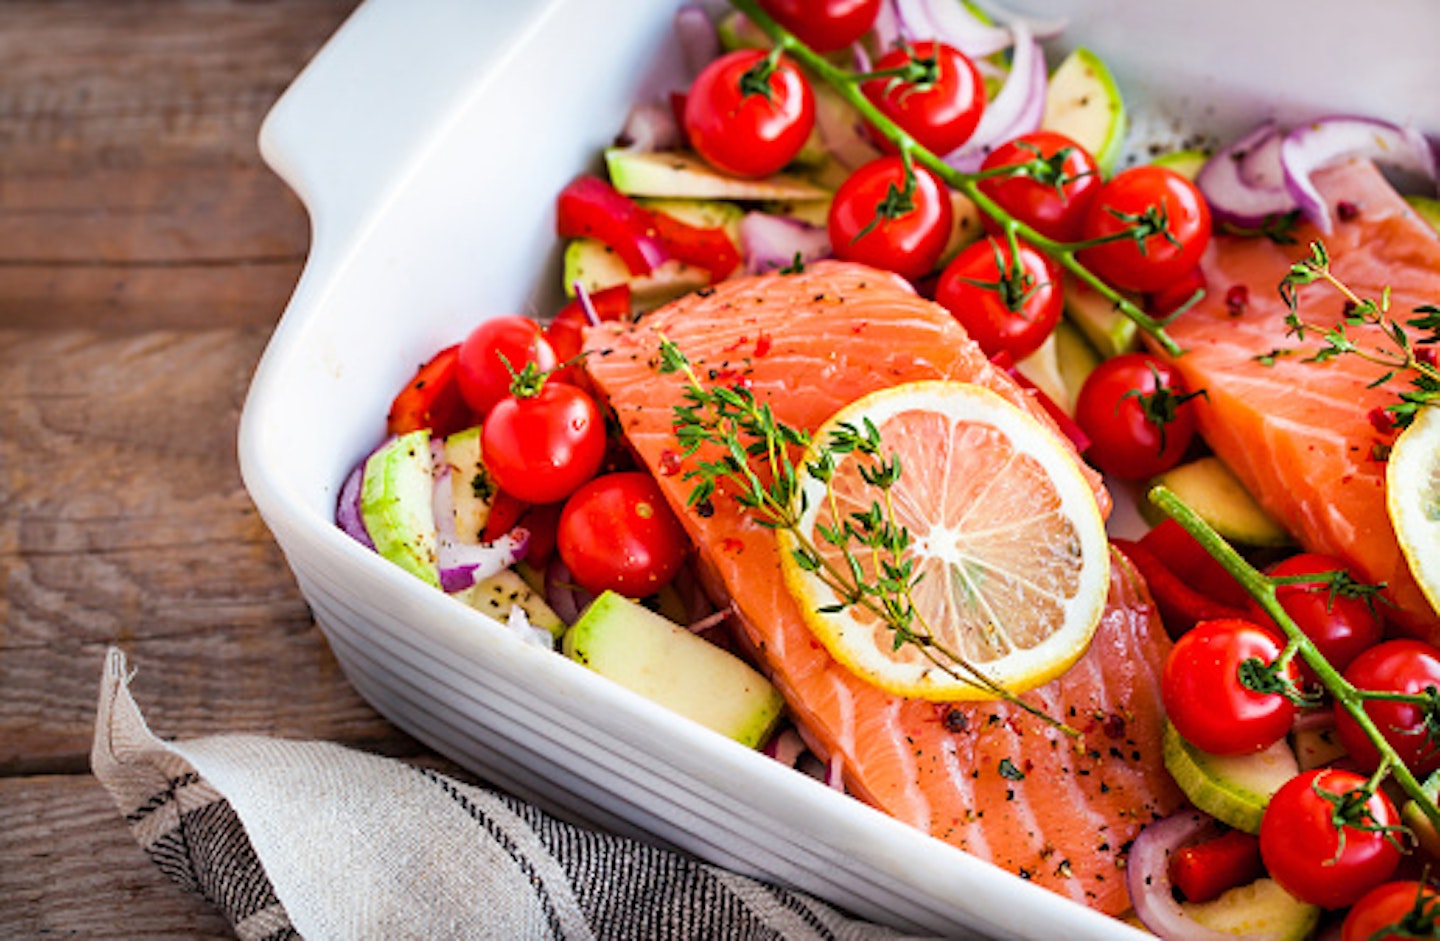 Salmon and vegetables in ovenproof dish